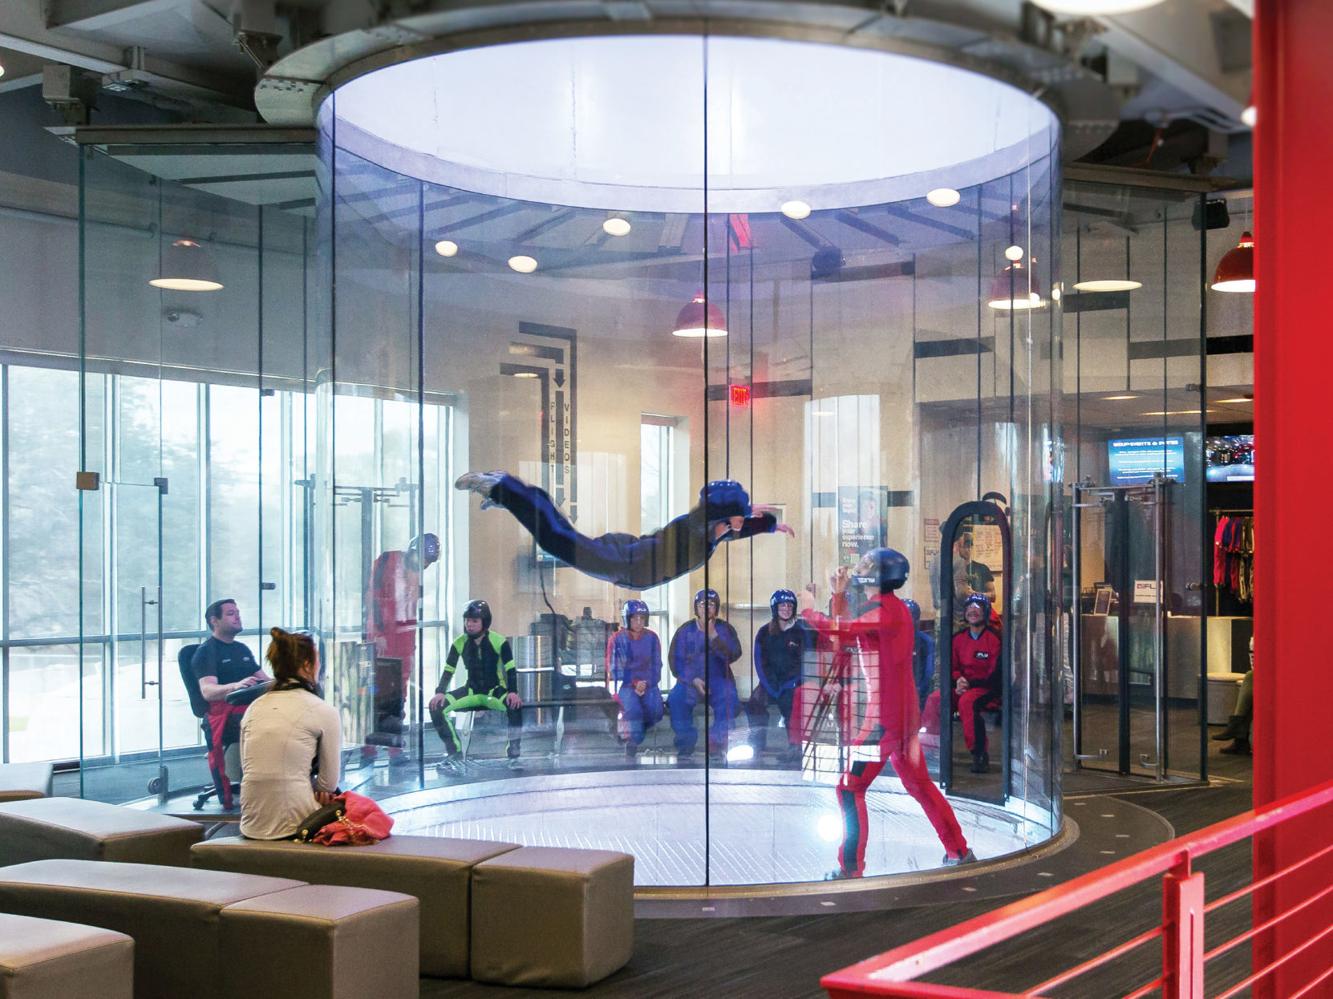 Minnesota's 1st indoor skydiving facility opens in Lake